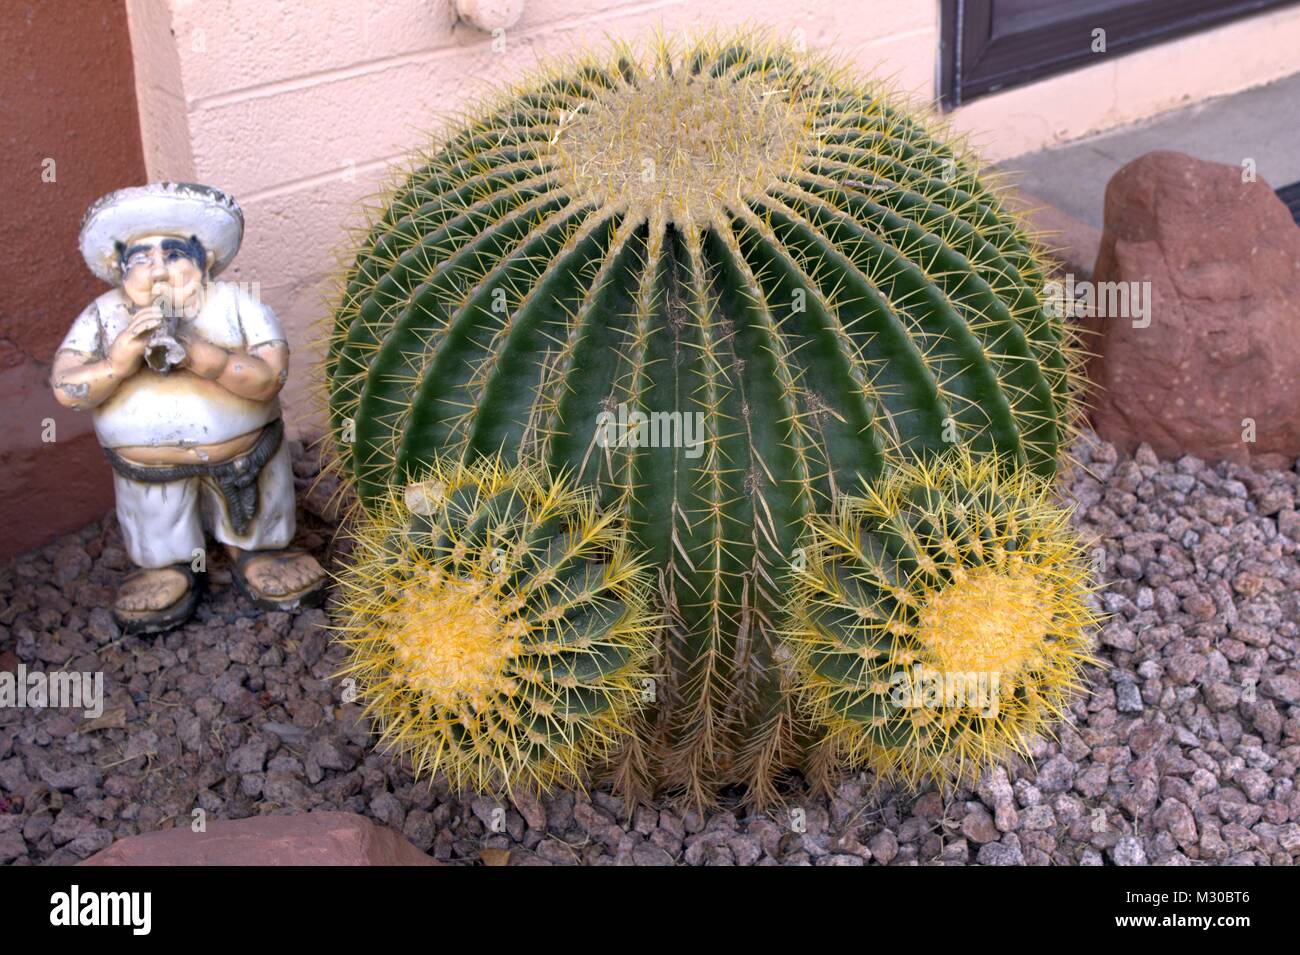 A Well Endowed Barrel Cactus Stock Photo